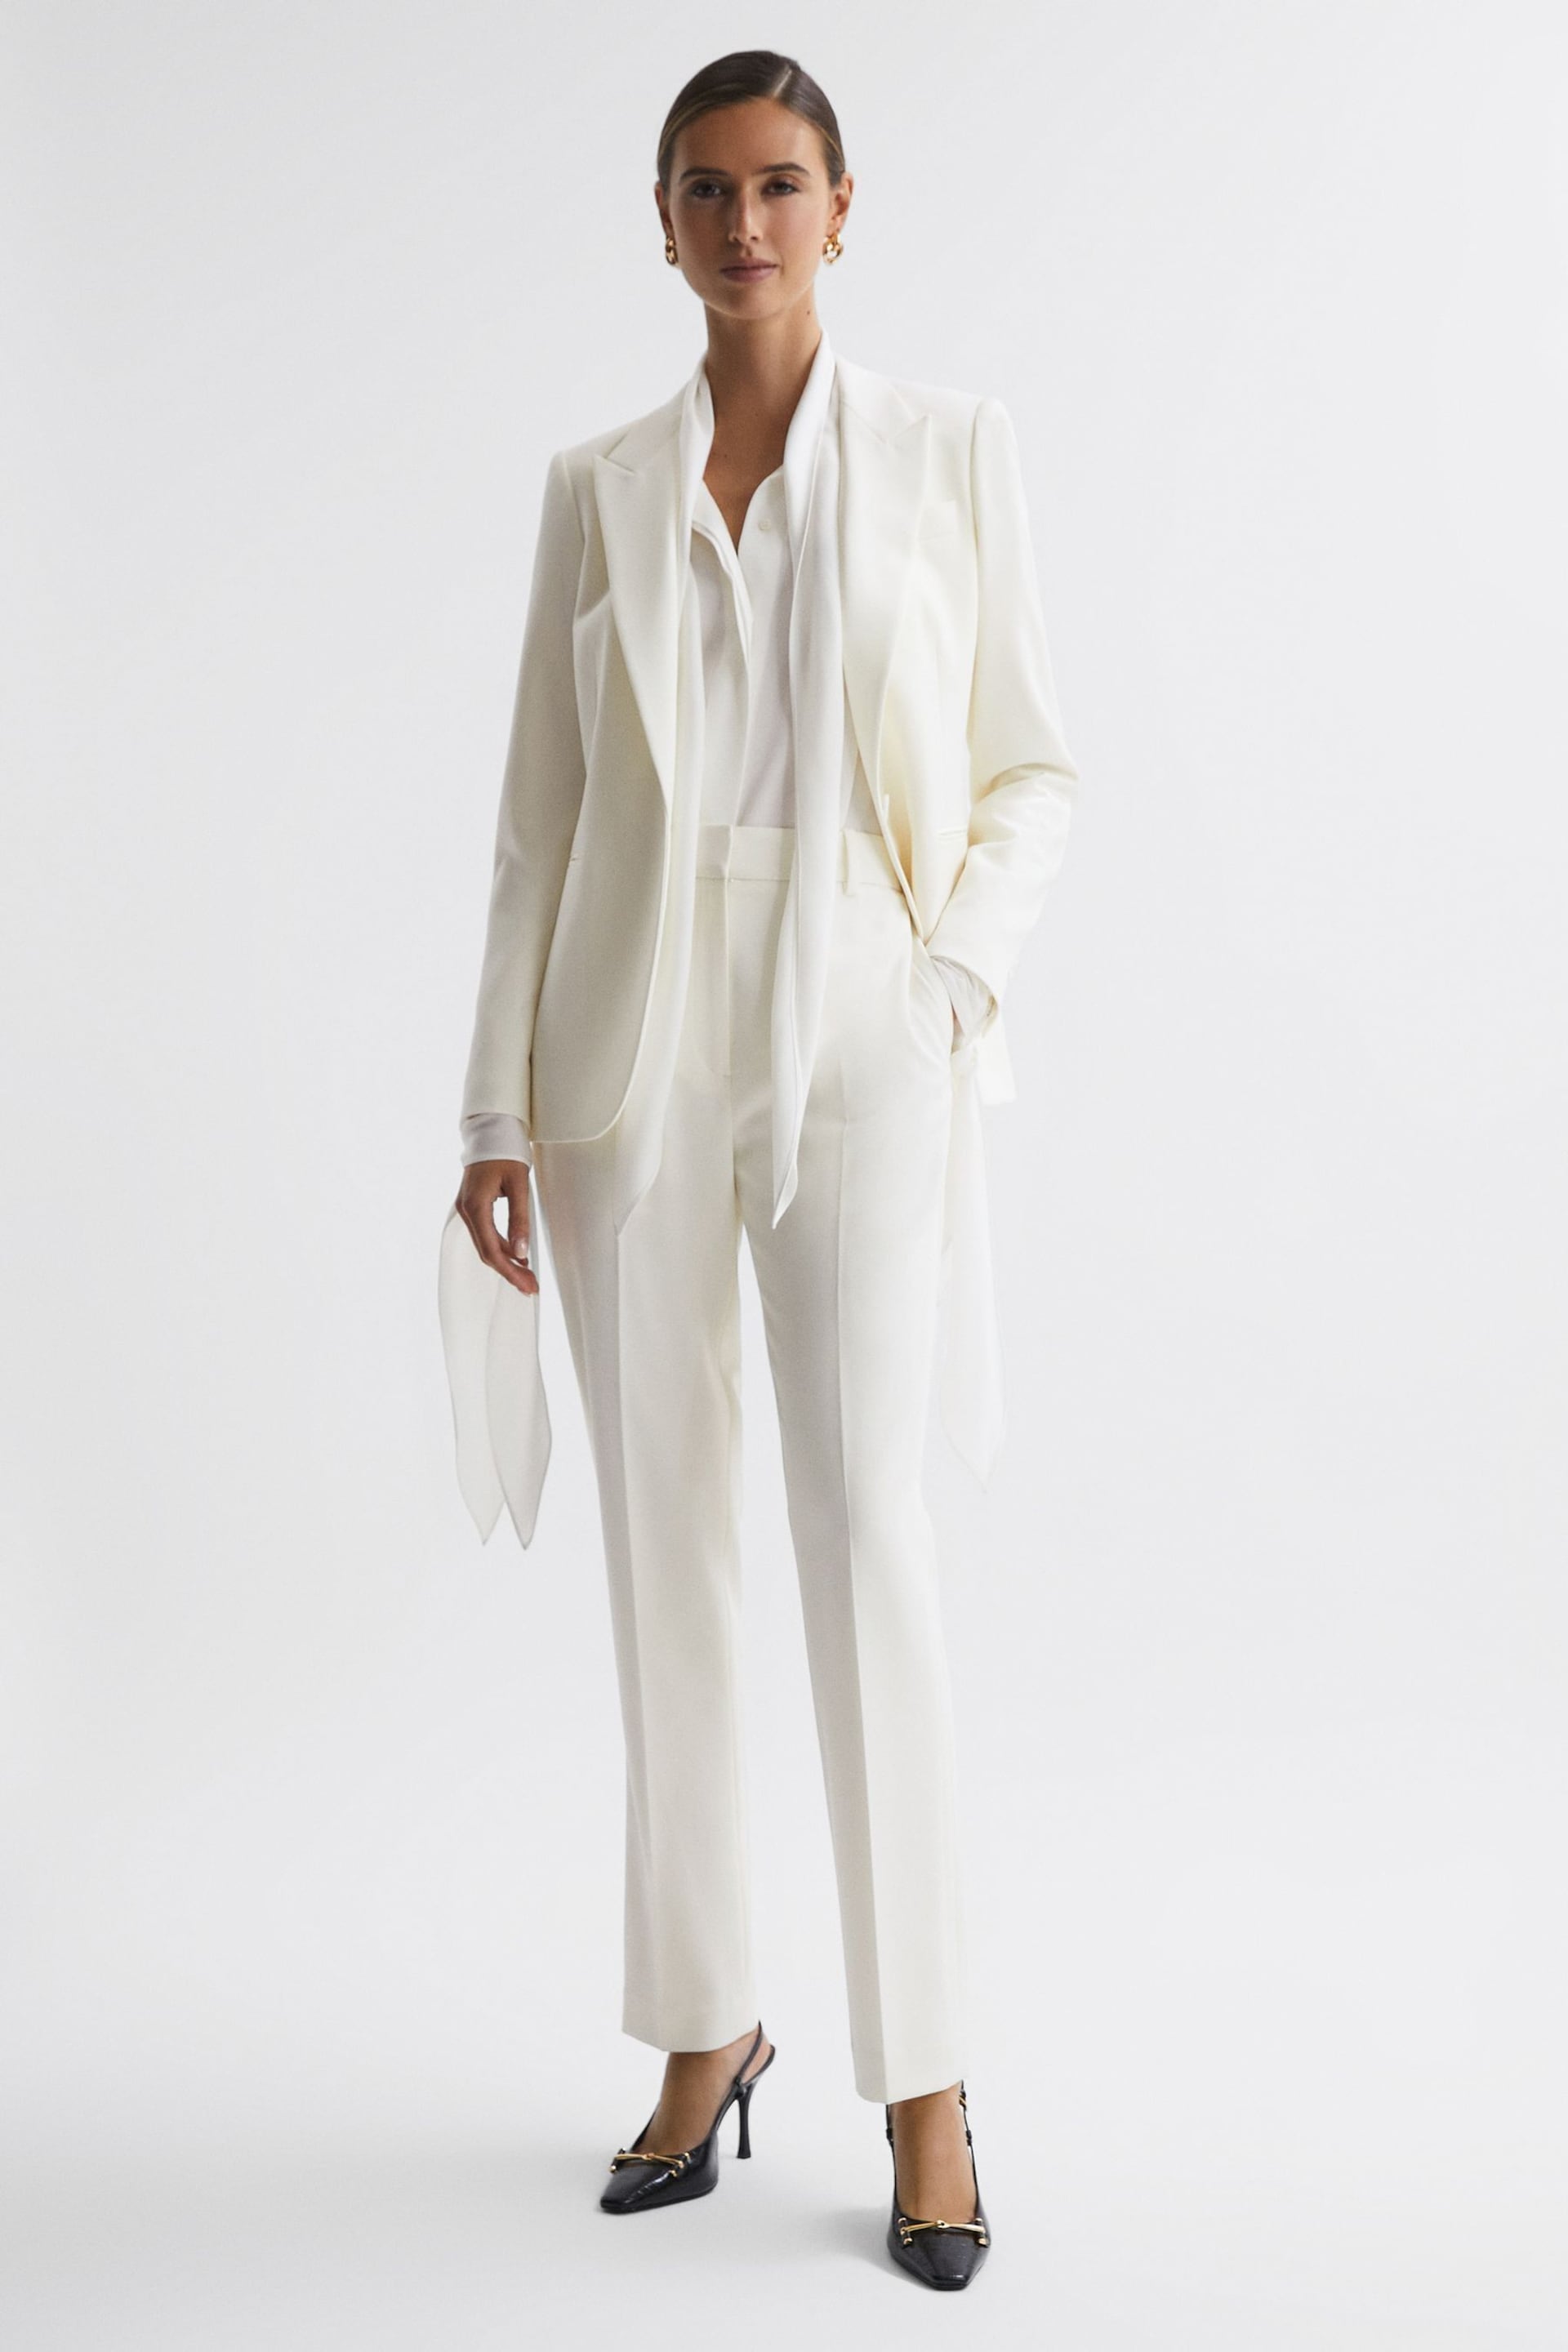 Reiss Off White Mila Tailored Fit Single Breasted Wool Suit Blazer - Image 3 of 6